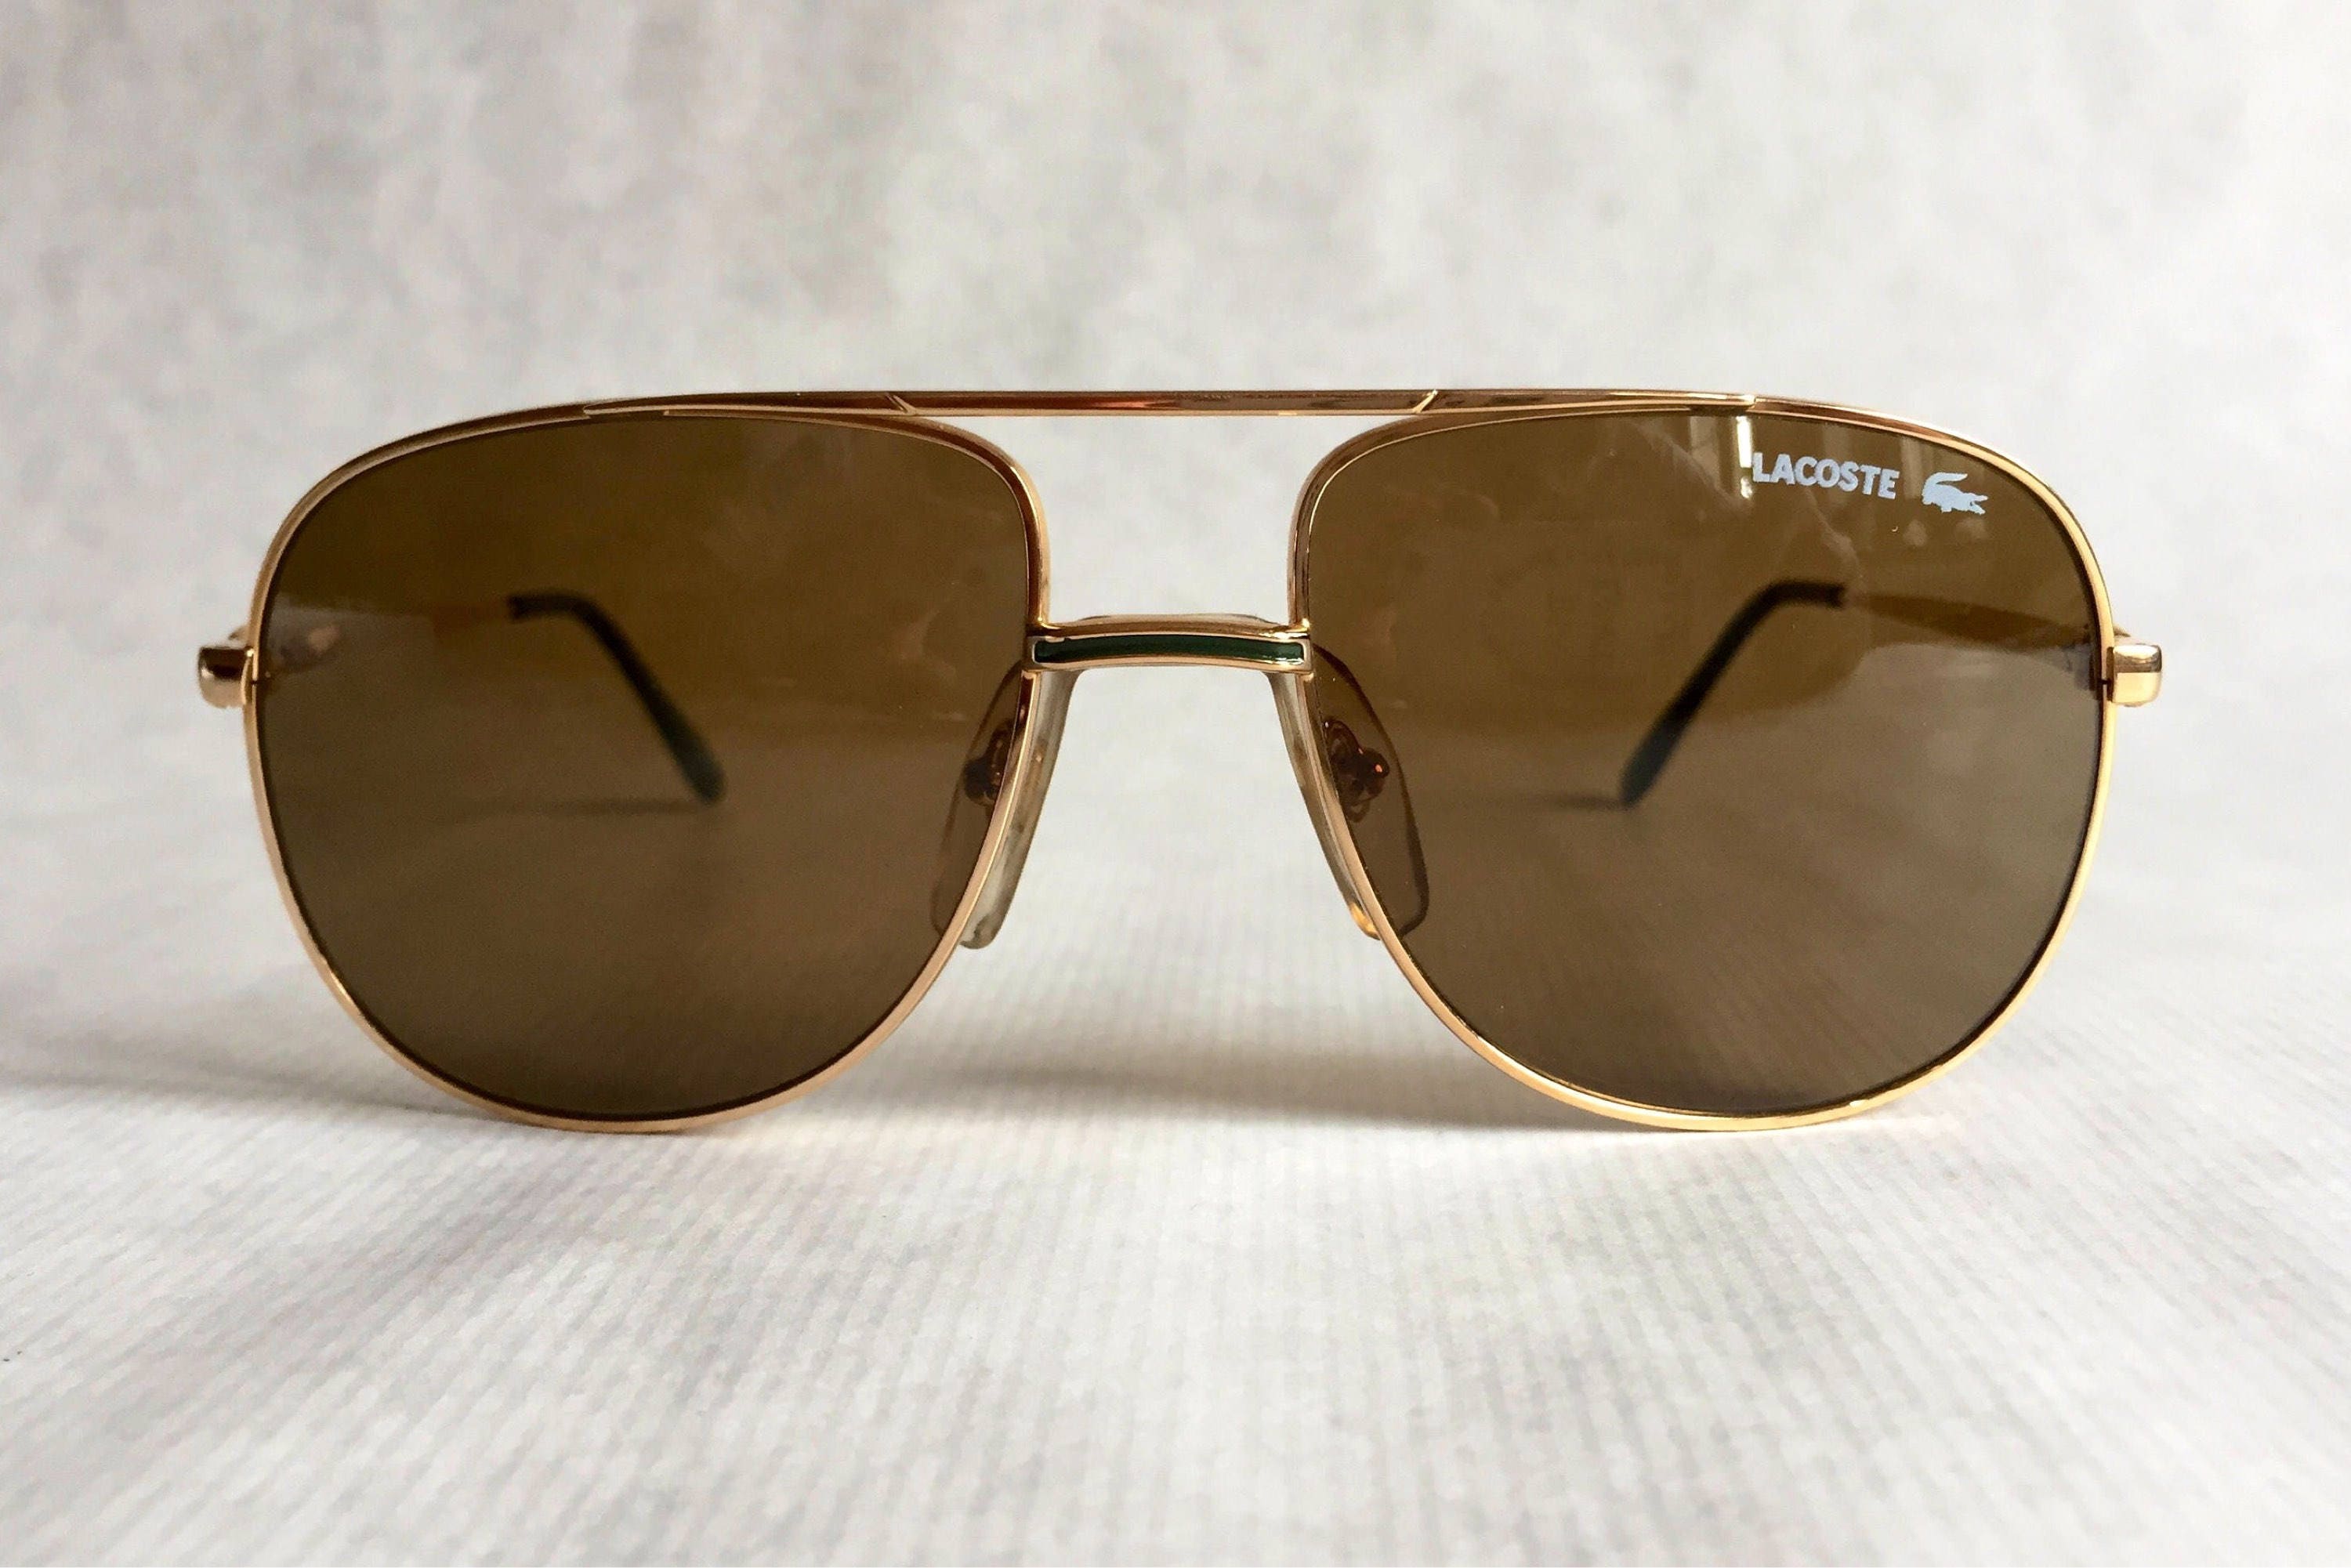 Lacoste 101 Vintage Sunglasses Made in 